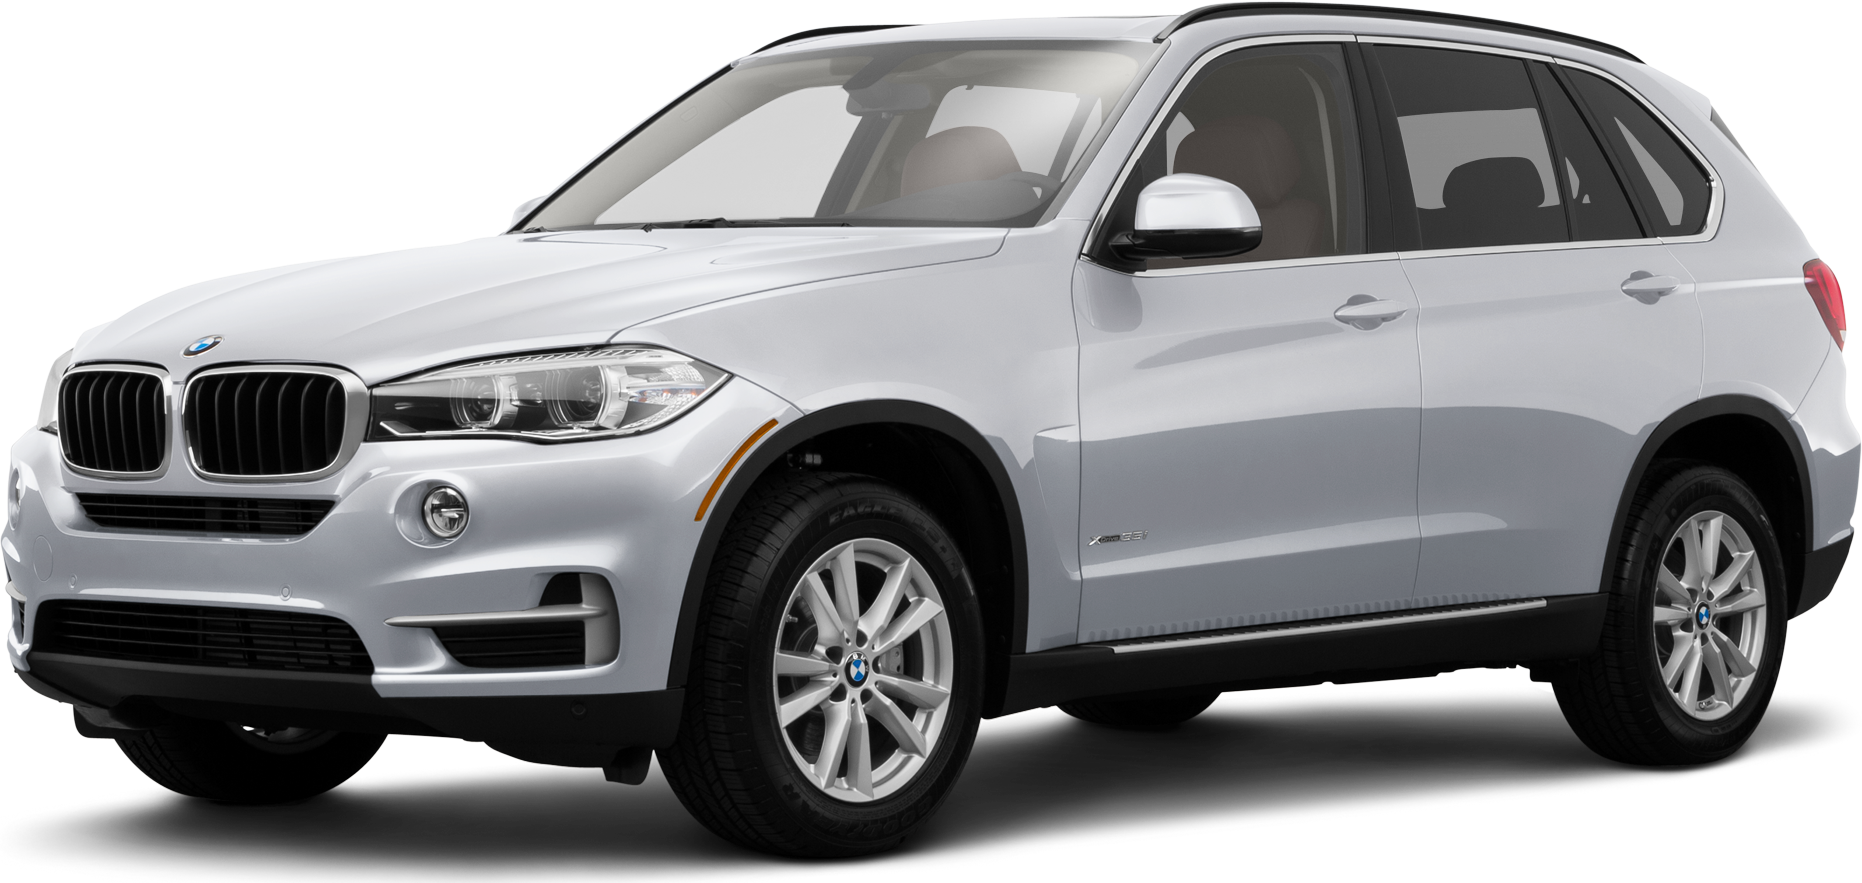 https://file.kelleybluebookimages.com/kbb/base/evox/CP/10039/2015-BMW-X5-front_10039_032_1862x883_A96_cropped.png